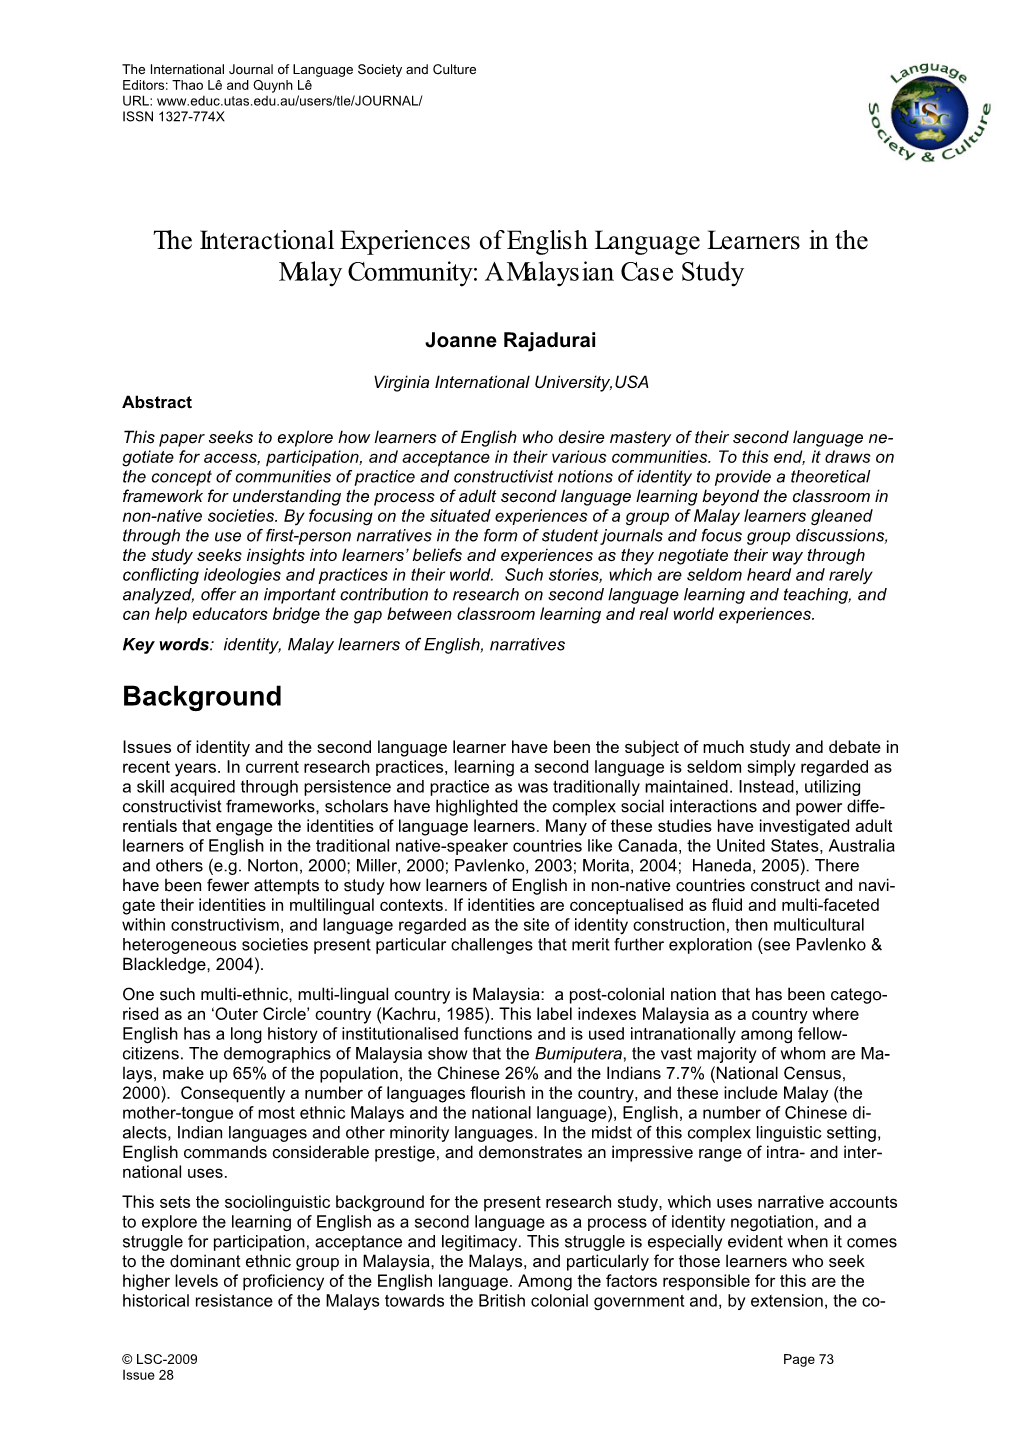 The Interactional Experiences of English Language Learners in the Malay Community: a Malaysian Case Study